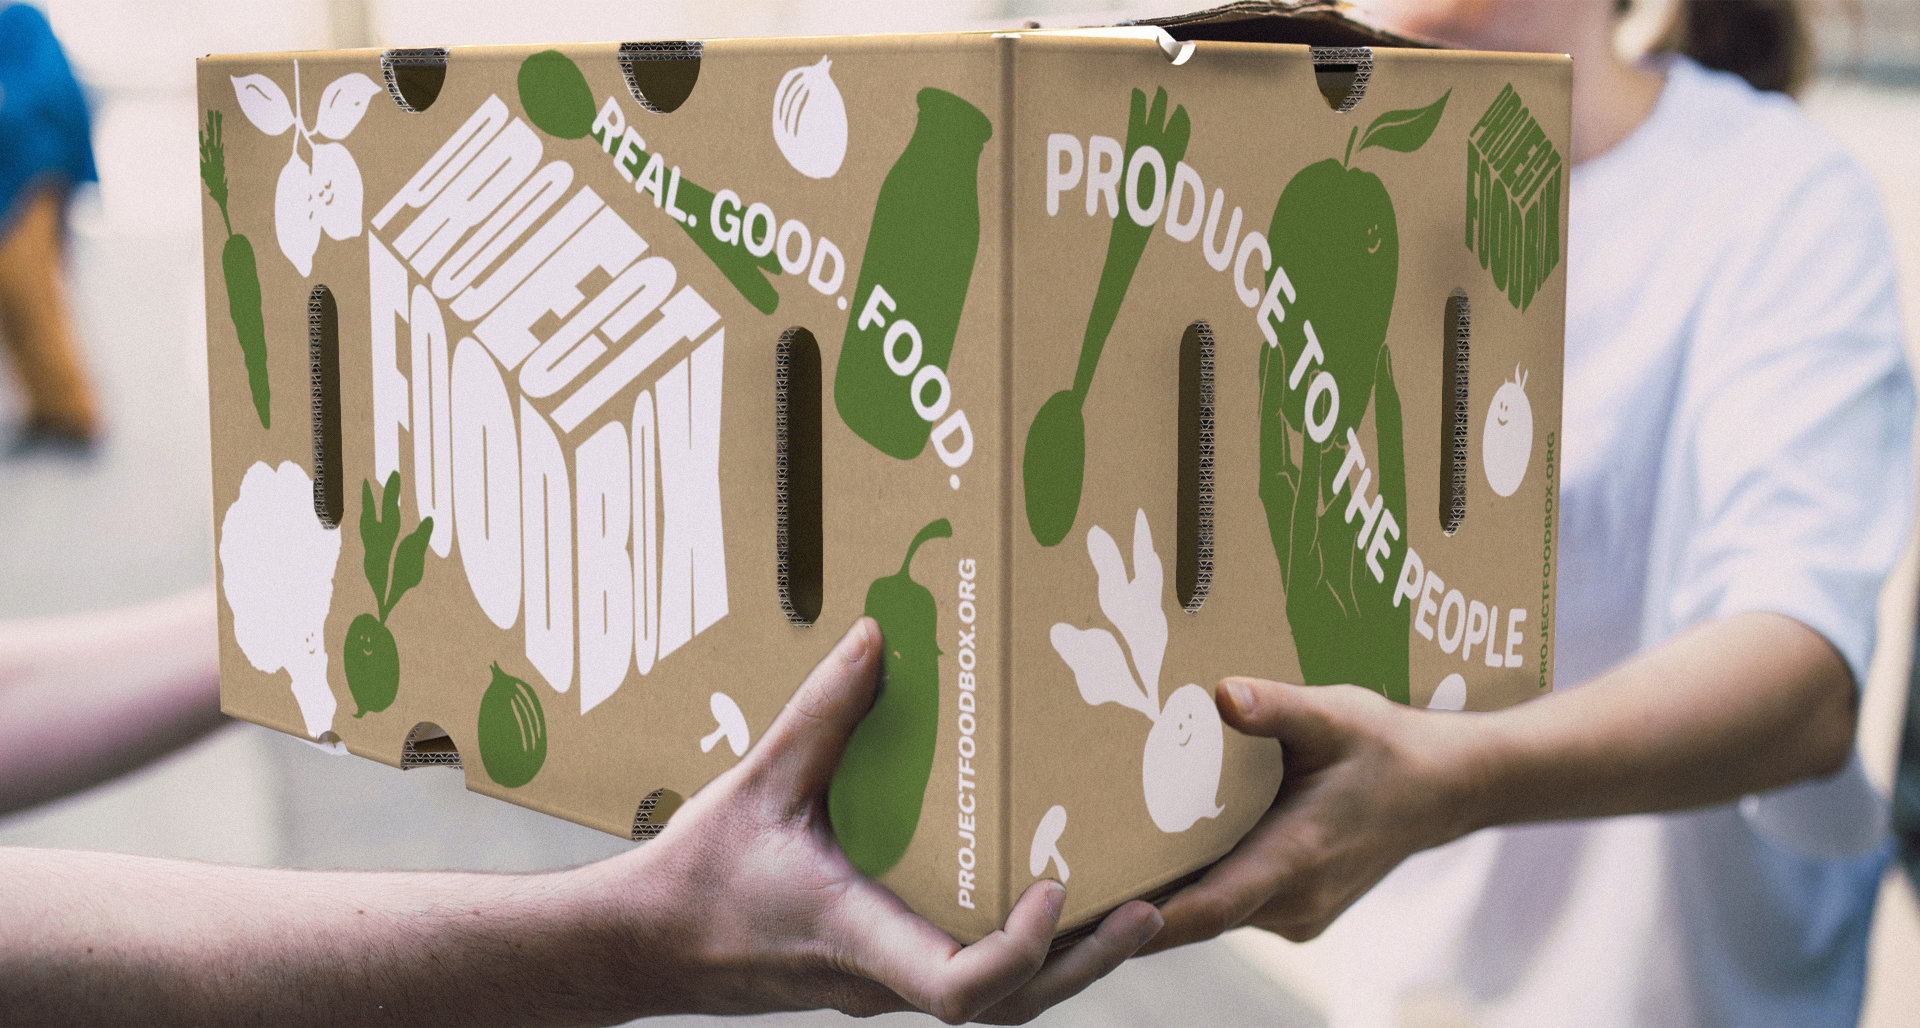 Grocery Box Delivery – Project Food Box